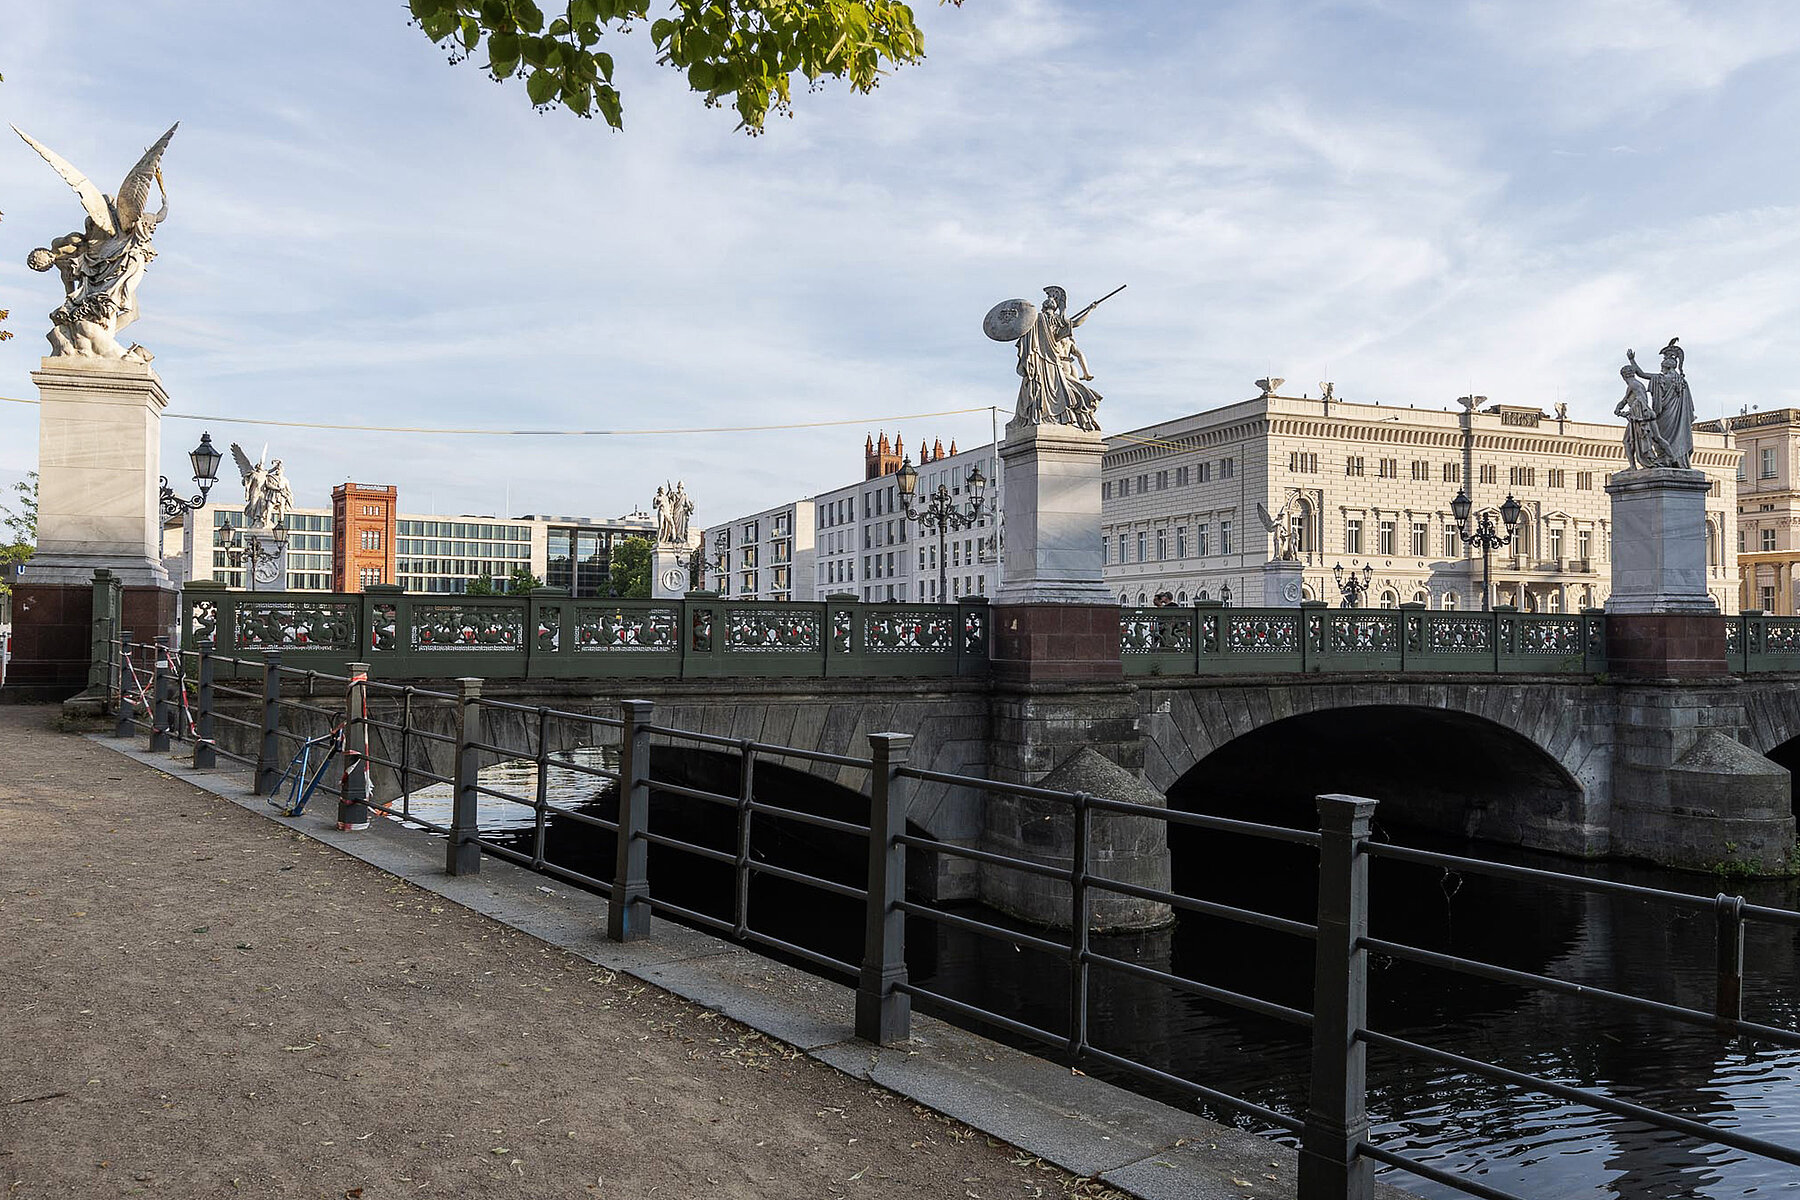 The Schlossbrücke crossing the Spree with sculptures of warriors and goddesses of victory on pedestals. In the background is the Commandant's House.